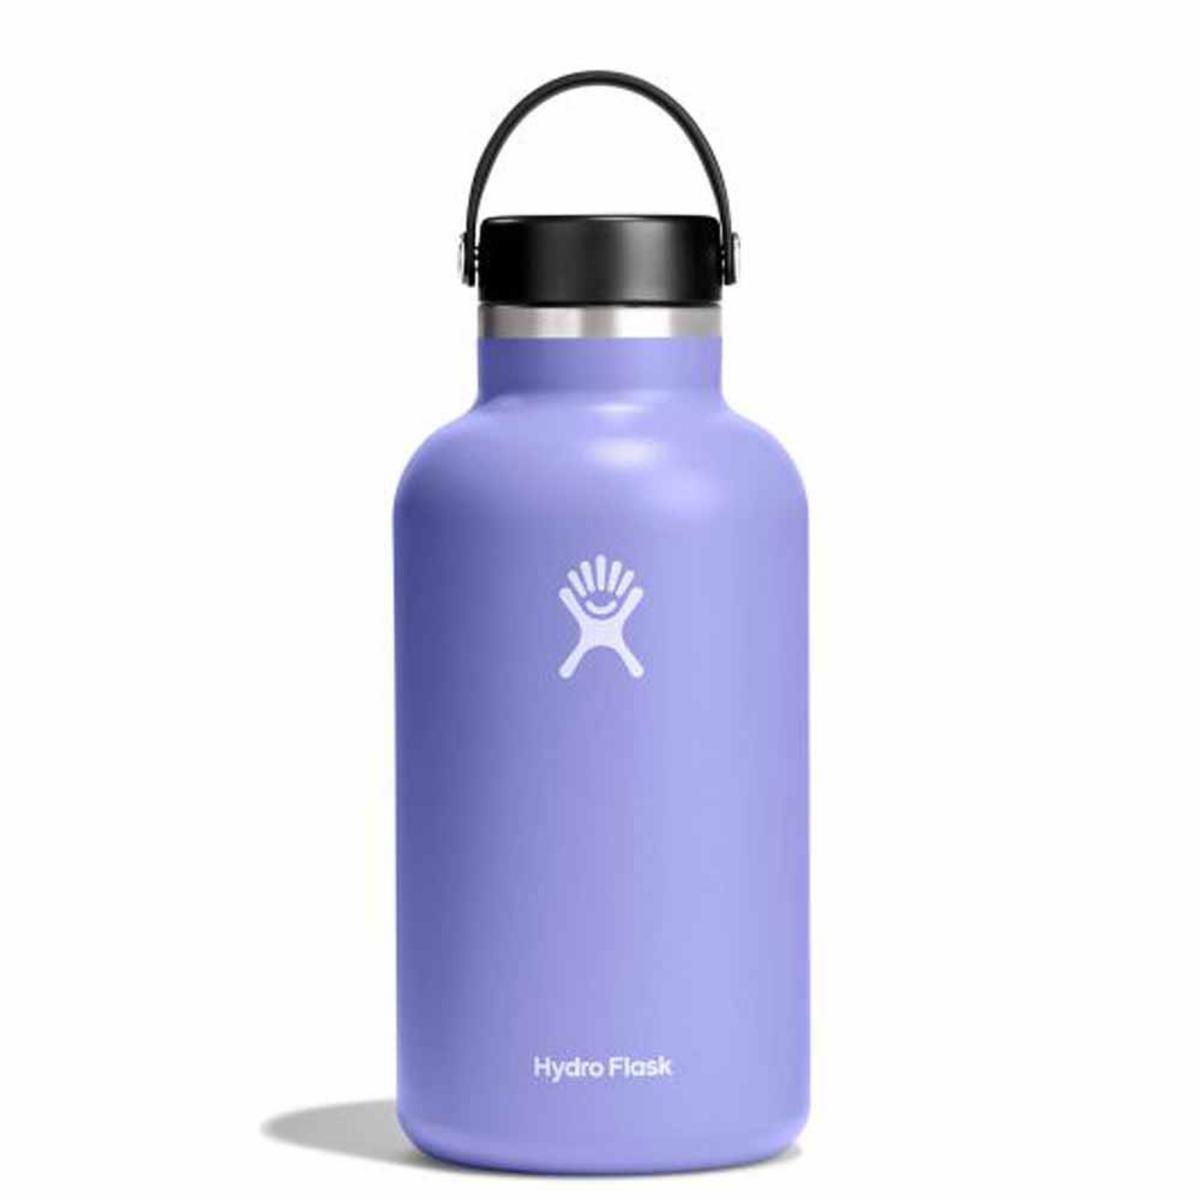 Hydro Flask 64oz Wide Mouth Insulated Water Bottle with Flex Cap